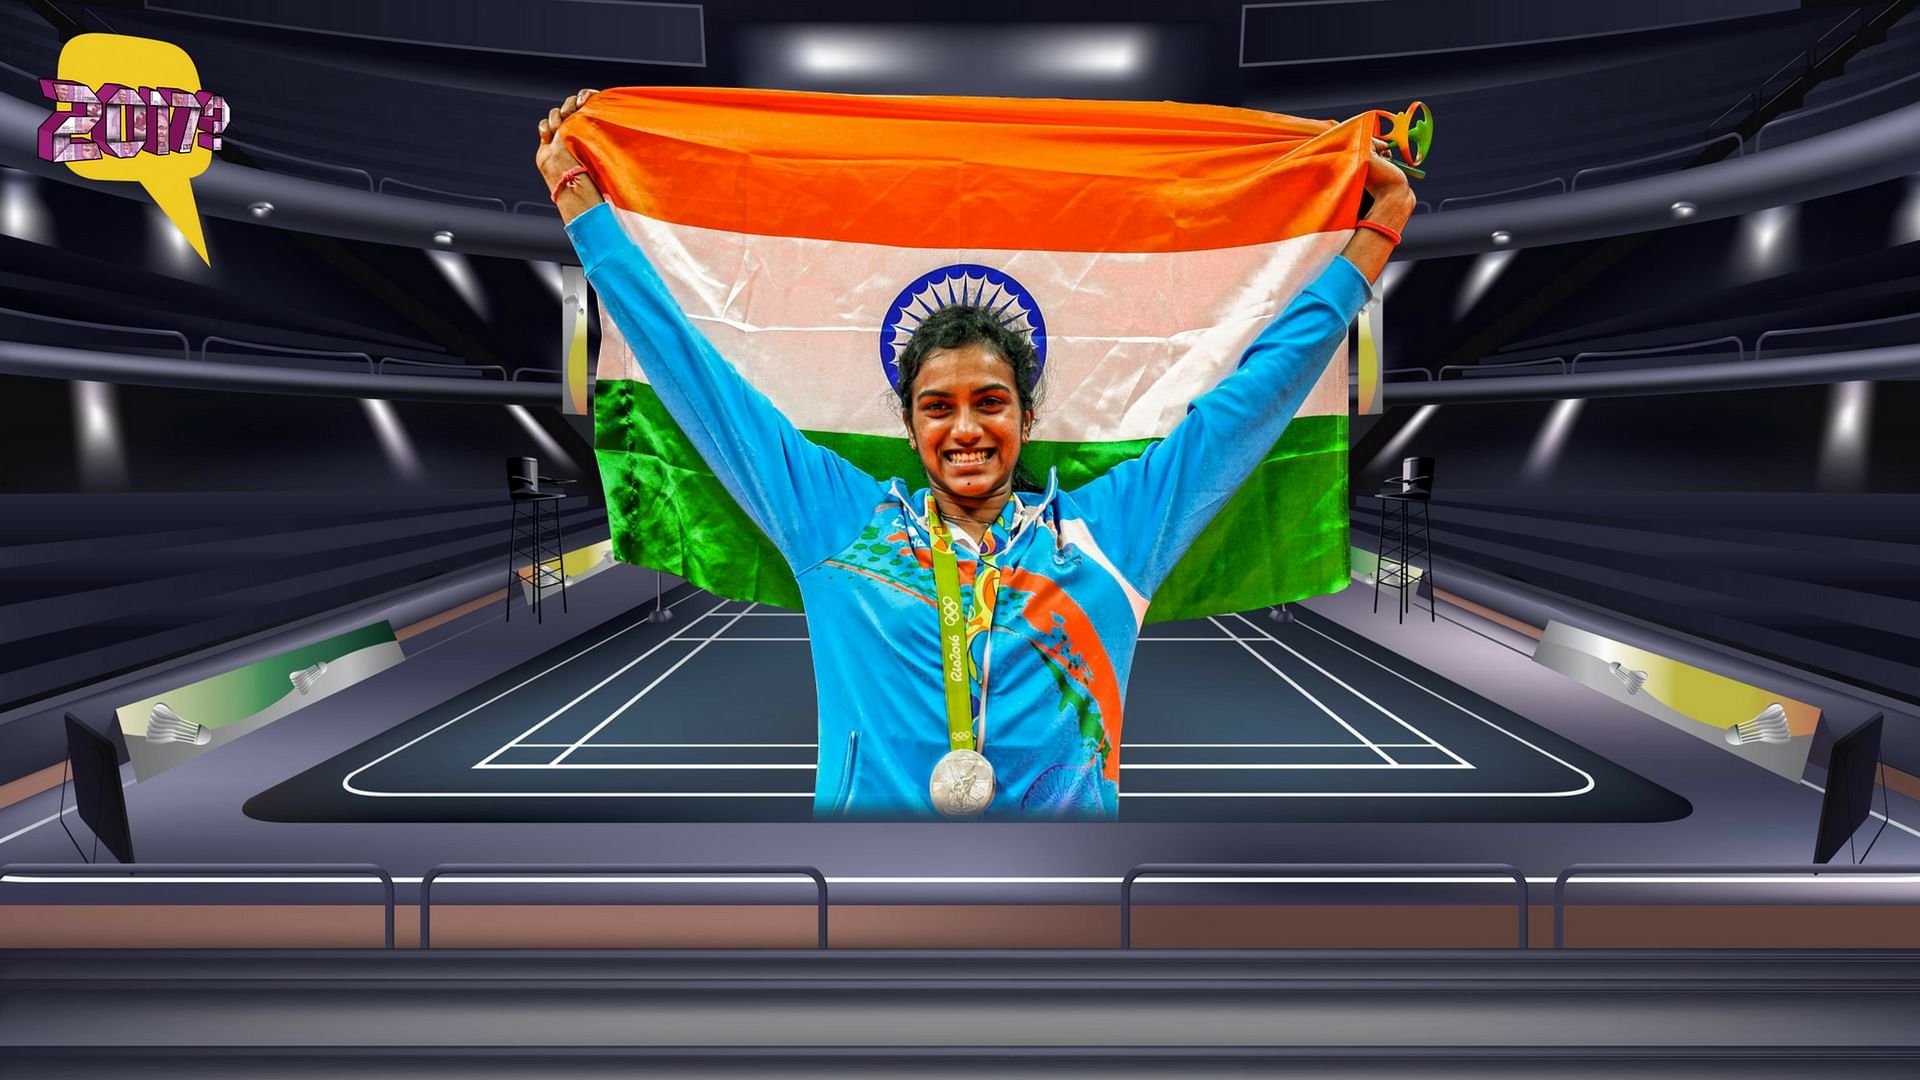 Star India shuttler PV Sindhu has said she wants to change the colour of her Olympic medal from silver to gold at the 2020 Tokyo Games.